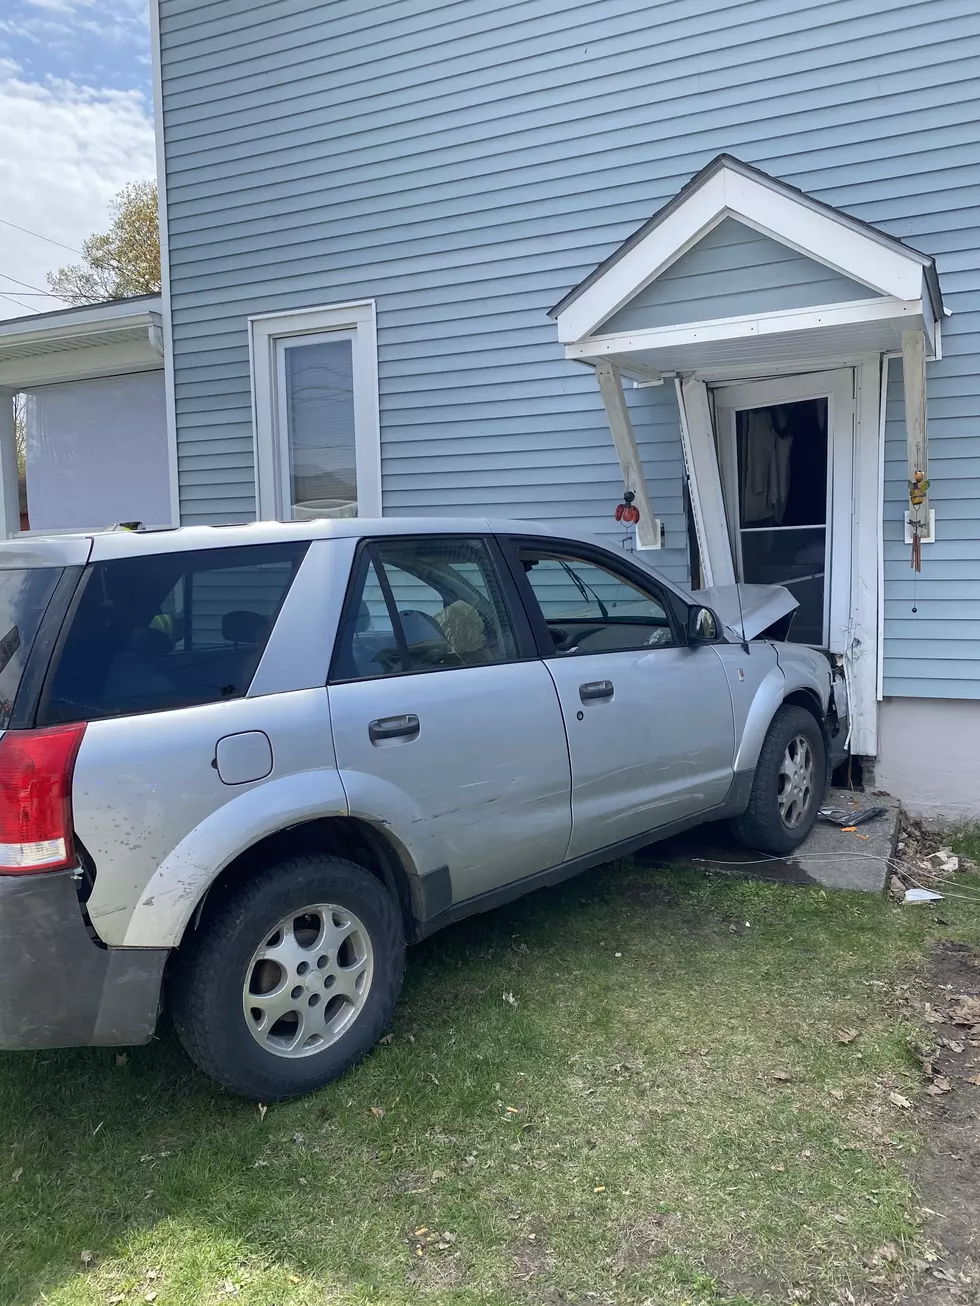 Driver In Bennington Tries To Make Residents House A Drive-Thru